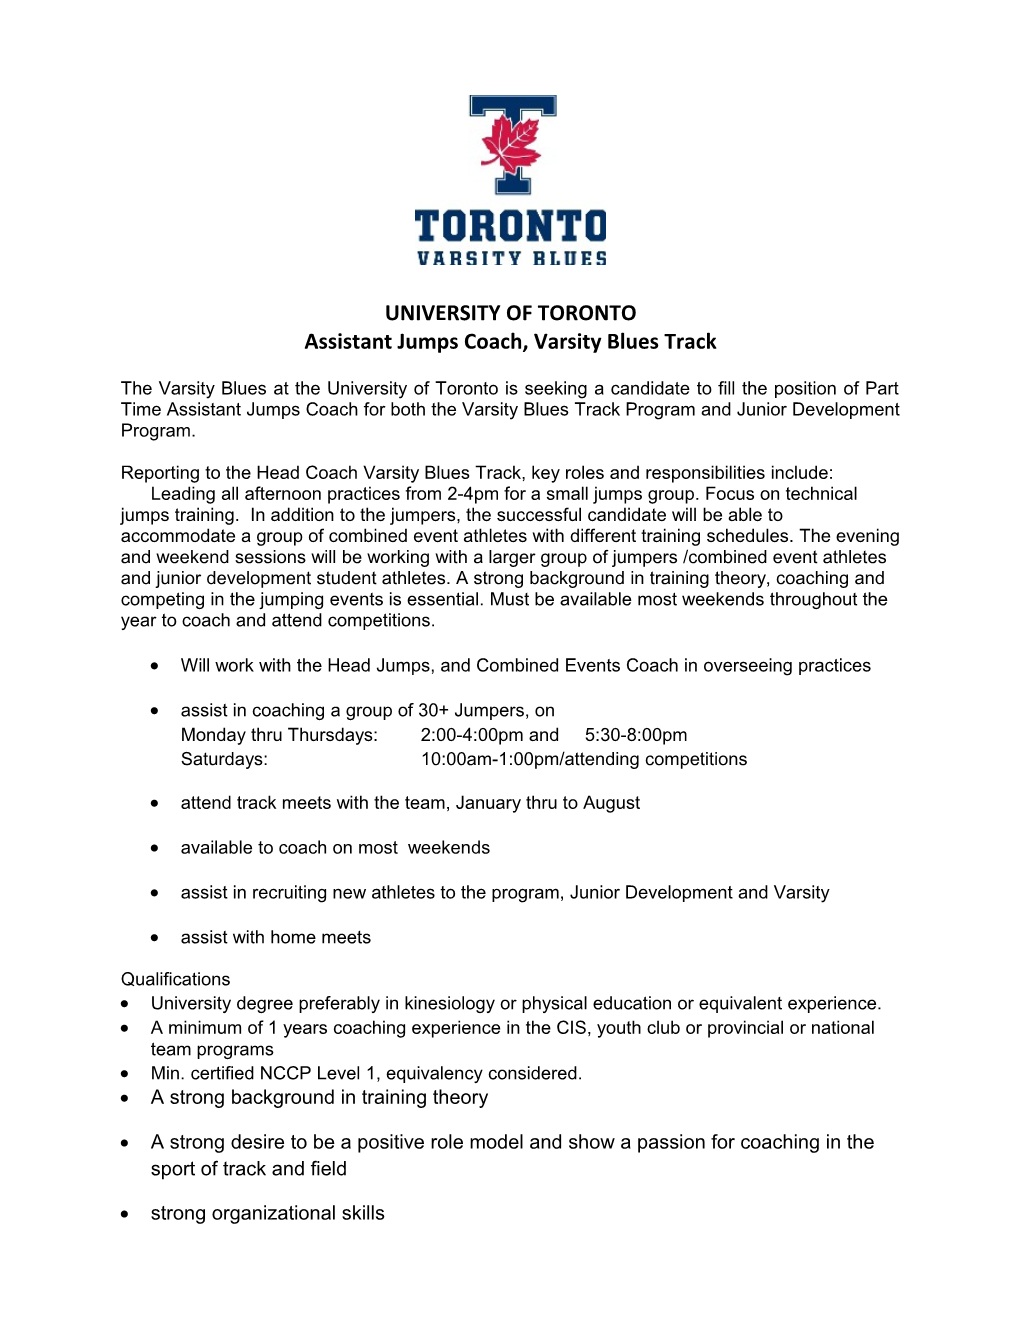 The Faculty of Physical Education and Health, University of Toronto Is Seeking an Experienced